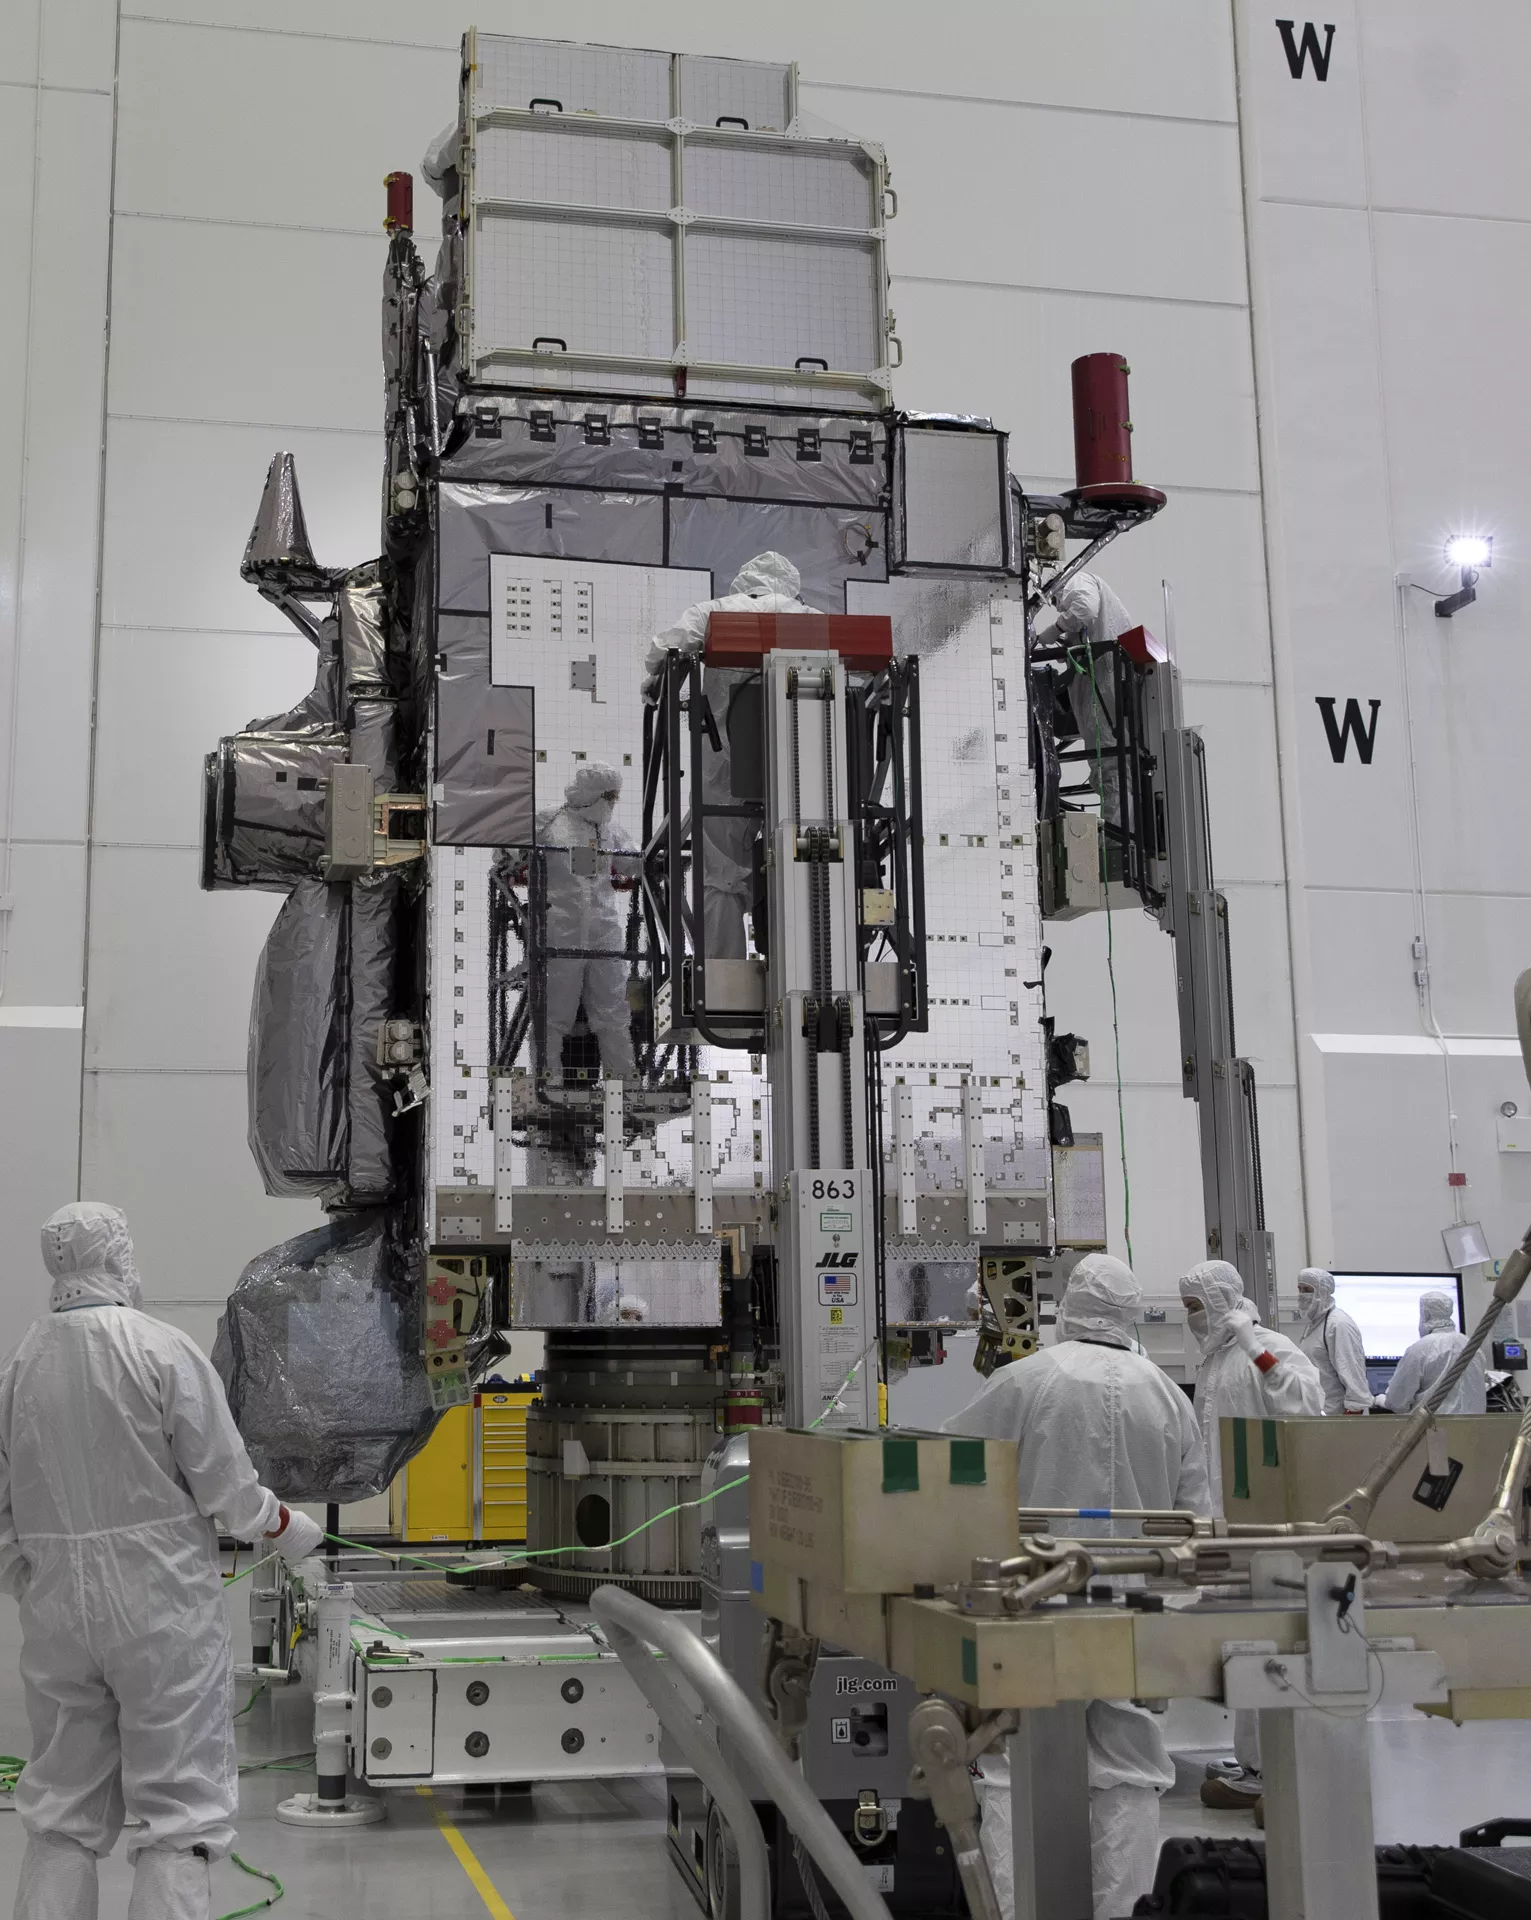 GOES-T is propped up to be more closely inspected.